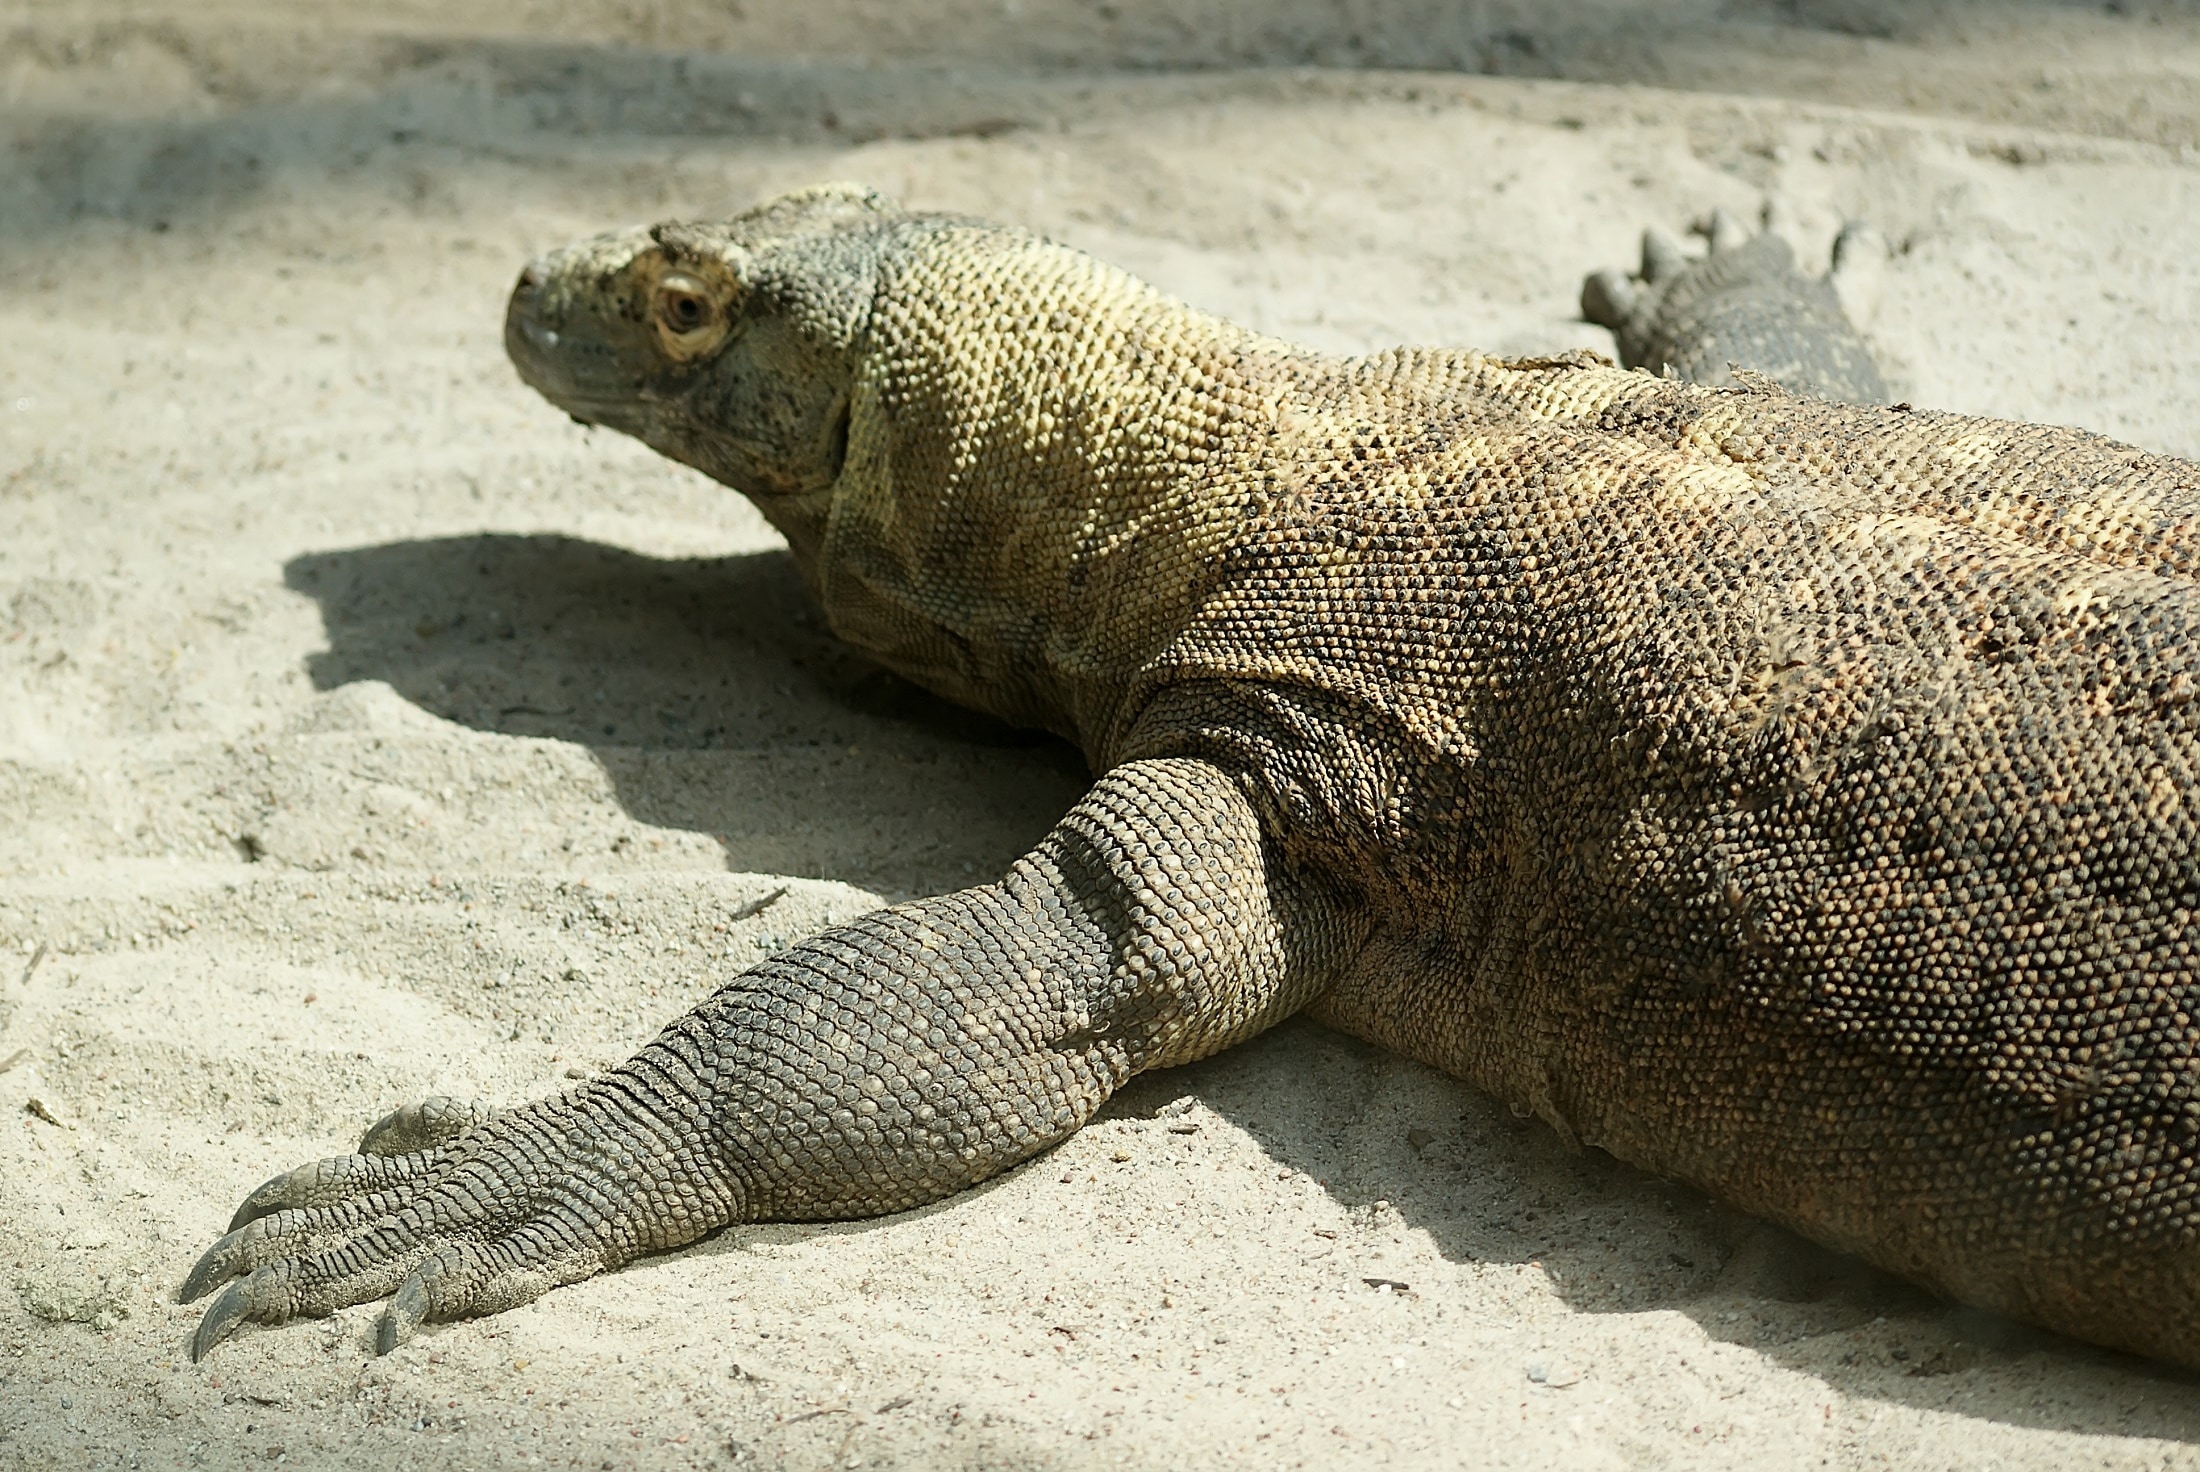 brown and black monitor lizard